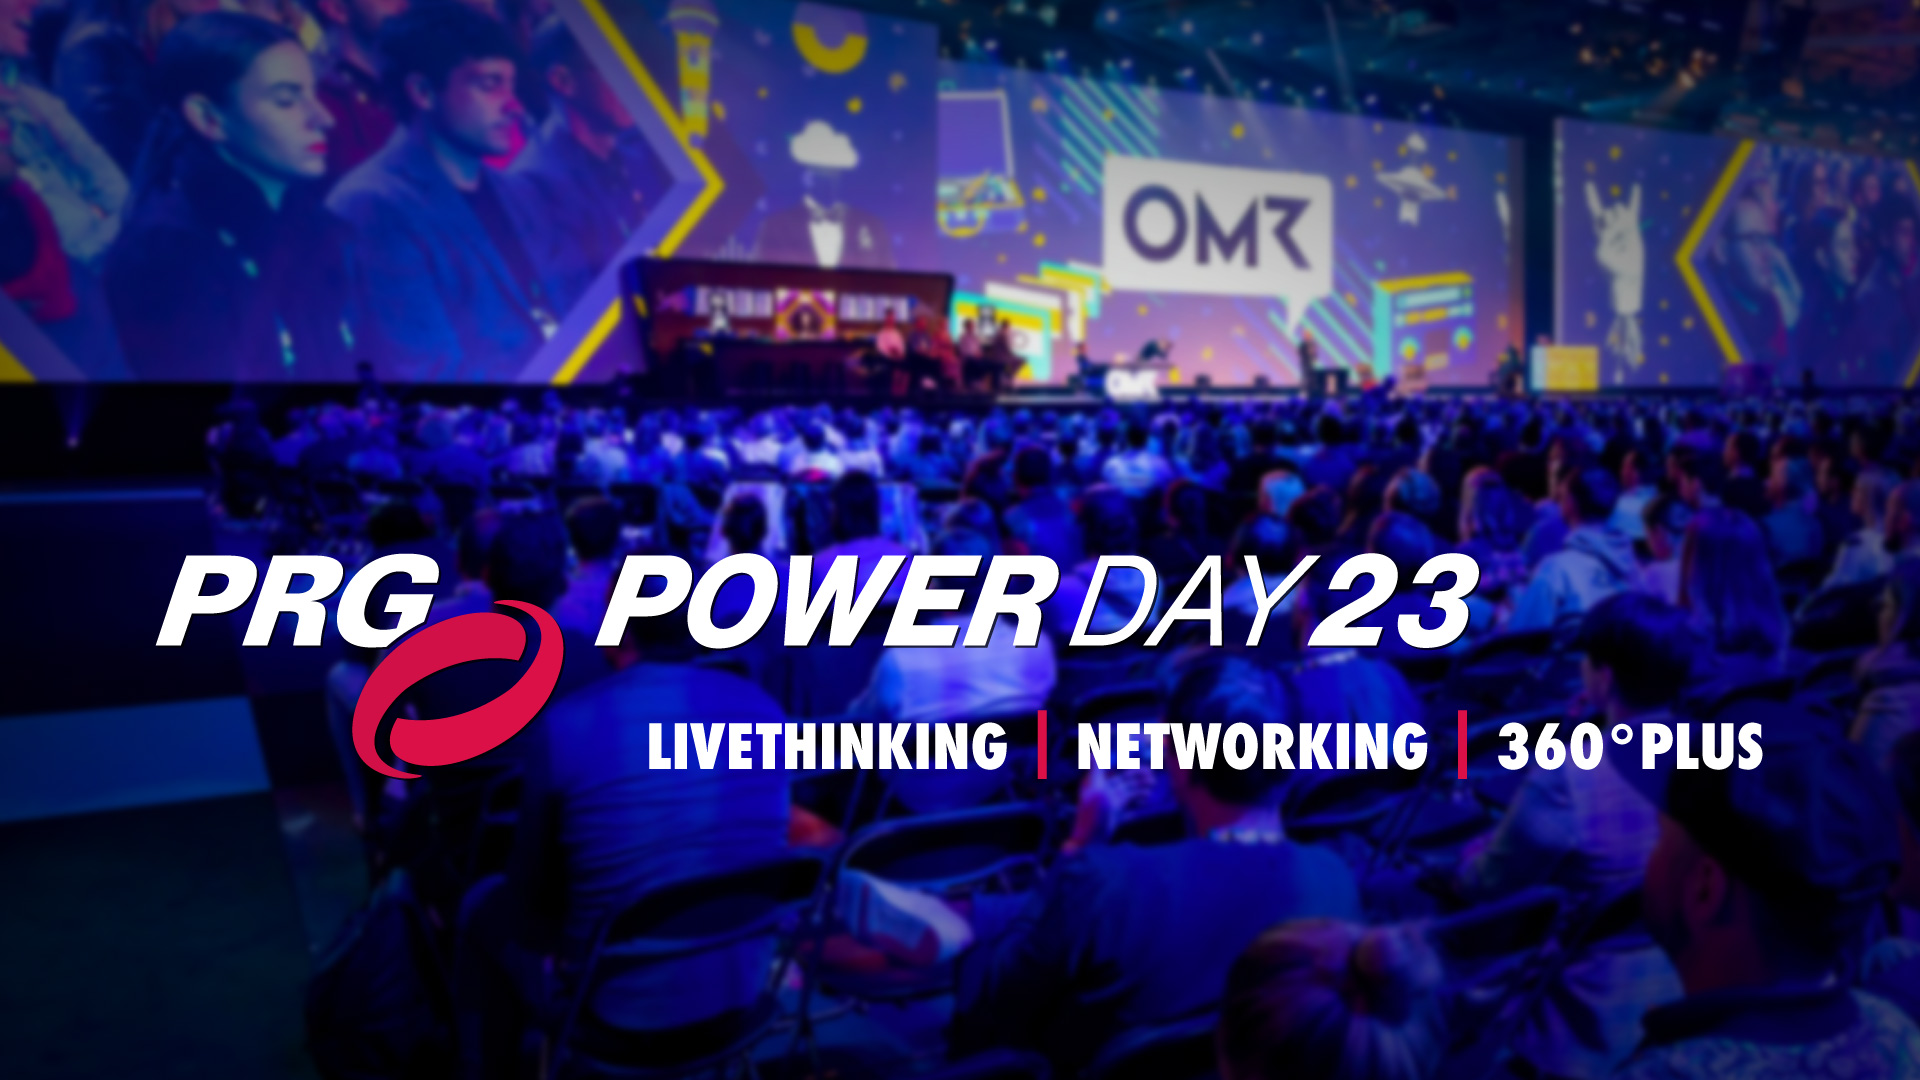 The first PRG Powerday 2023 took place in Cologne on June 19, 2023, and inspired guests with a diverse program centered around livethinking, networking and 360° Plus.